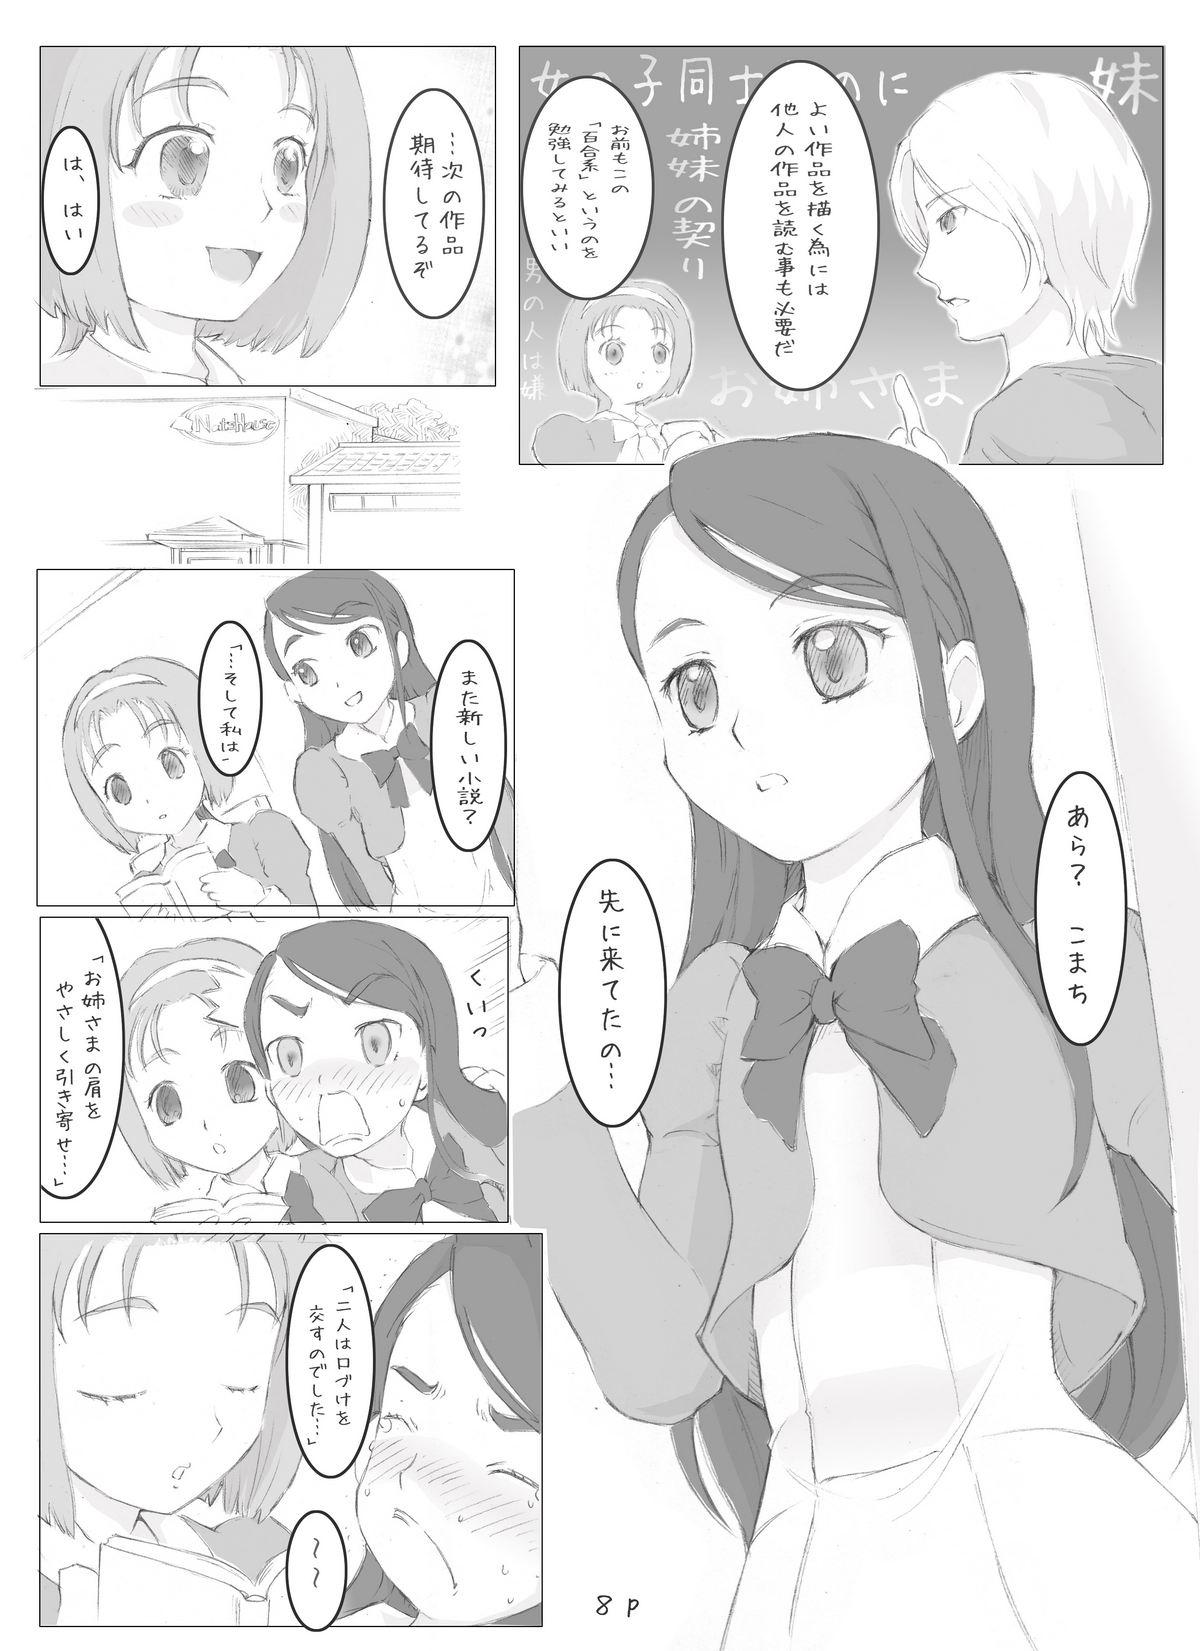 Lesbos キュアキュアデイズ - Yes precure 5 Gros Seins - Page 9